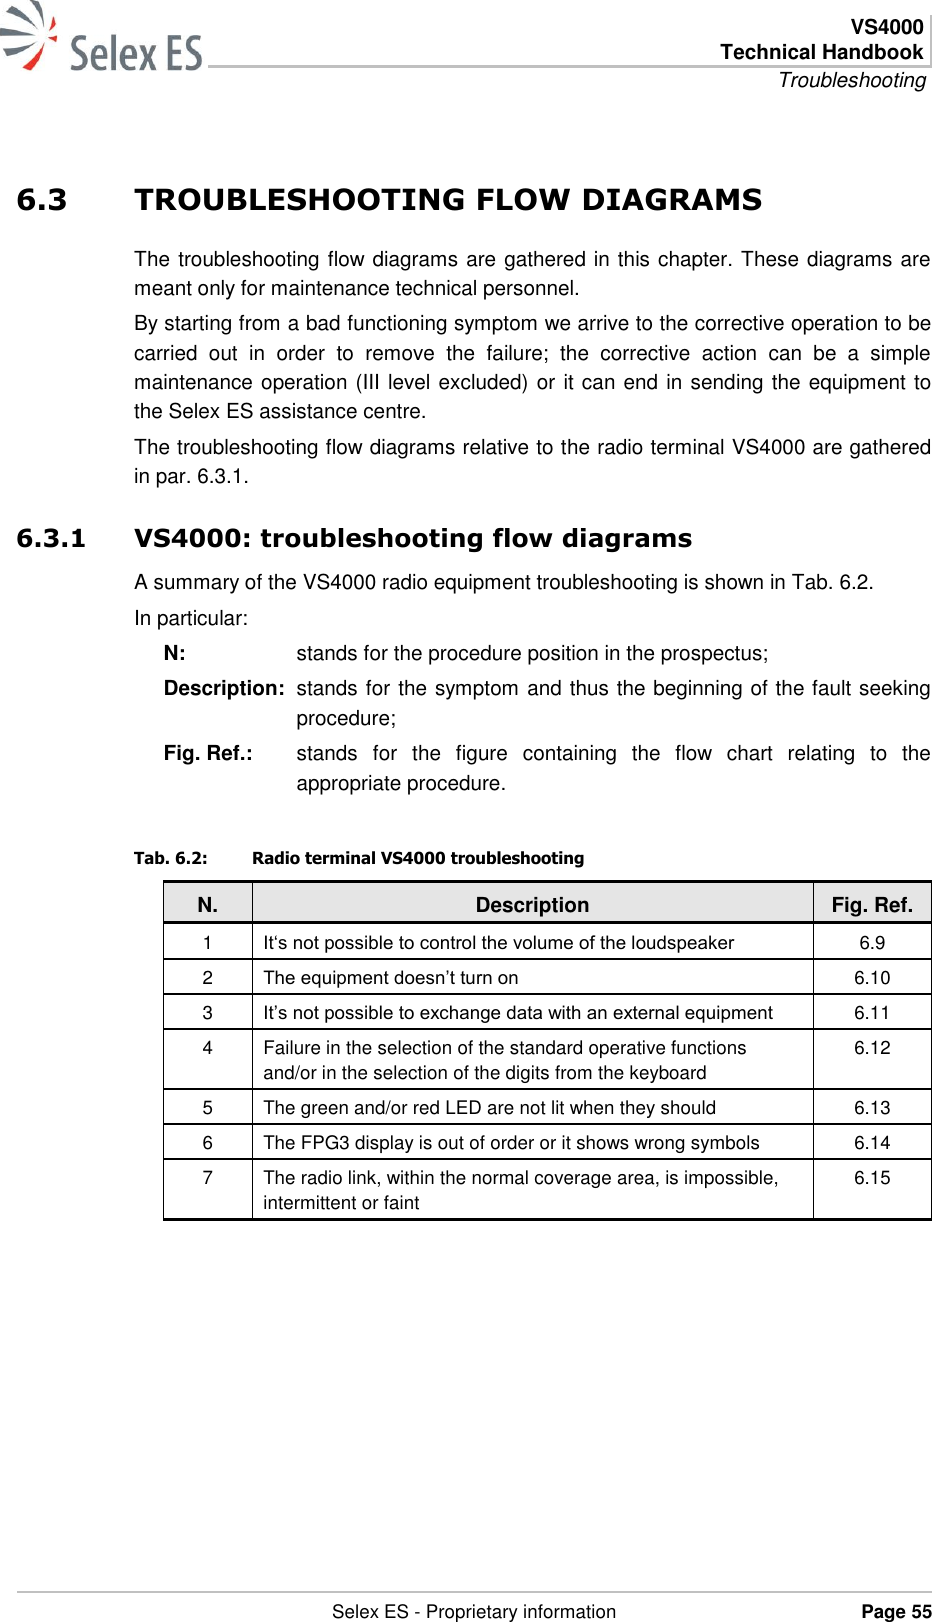  VS4000 Technical Handbook Troubleshooting   Selex ES - Proprietary information Page 55  6.3 TROUBLESHOOTING FLOW DIAGRAMS The troubleshooting flow diagrams are gathered in this chapter. These diagrams are meant only for maintenance technical personnel. By starting from a bad functioning symptom we arrive to the corrective operation to be carried  out  in  order  to  remove  the  failure;  the  corrective  action  can  be  a  simple maintenance operation (III level excluded) or it can end in sending the equipment to the Selex ES assistance centre.  The troubleshooting flow diagrams relative to the radio terminal VS4000 are gathered in par. 6.3.1. 6.3.1 VS4000: troubleshooting flow diagrams A summary of the VS4000 radio equipment troubleshooting is shown in Tab. 6.2. In particular: N:  stands for the procedure position in the prospectus; Description:  stands for the symptom and thus the beginning of the fault seeking procedure; Fig. Ref.:  stands  for  the  figure  containing  the  flow  chart  relating  to  the appropriate procedure. Tab. 6.2:  Radio terminal VS4000 troubleshooting N. Description Fig. Ref. 1 It‘s not possible to control the volume of the loudspeaker  6.9 2 The equipment doesn’t turn on 6.10 3 It’s not possible to exchange data with an external equipment  6.11 4 Failure in the selection of the standard operative functions and/or in the selection of the digits from the keyboard 6.12 5 The green and/or red LED are not lit when they should 6.13 6 The FPG3 display is out of order or it shows wrong symbols 6.14 7 The radio link, within the normal coverage area, is impossible, intermittent or faint 6.15  